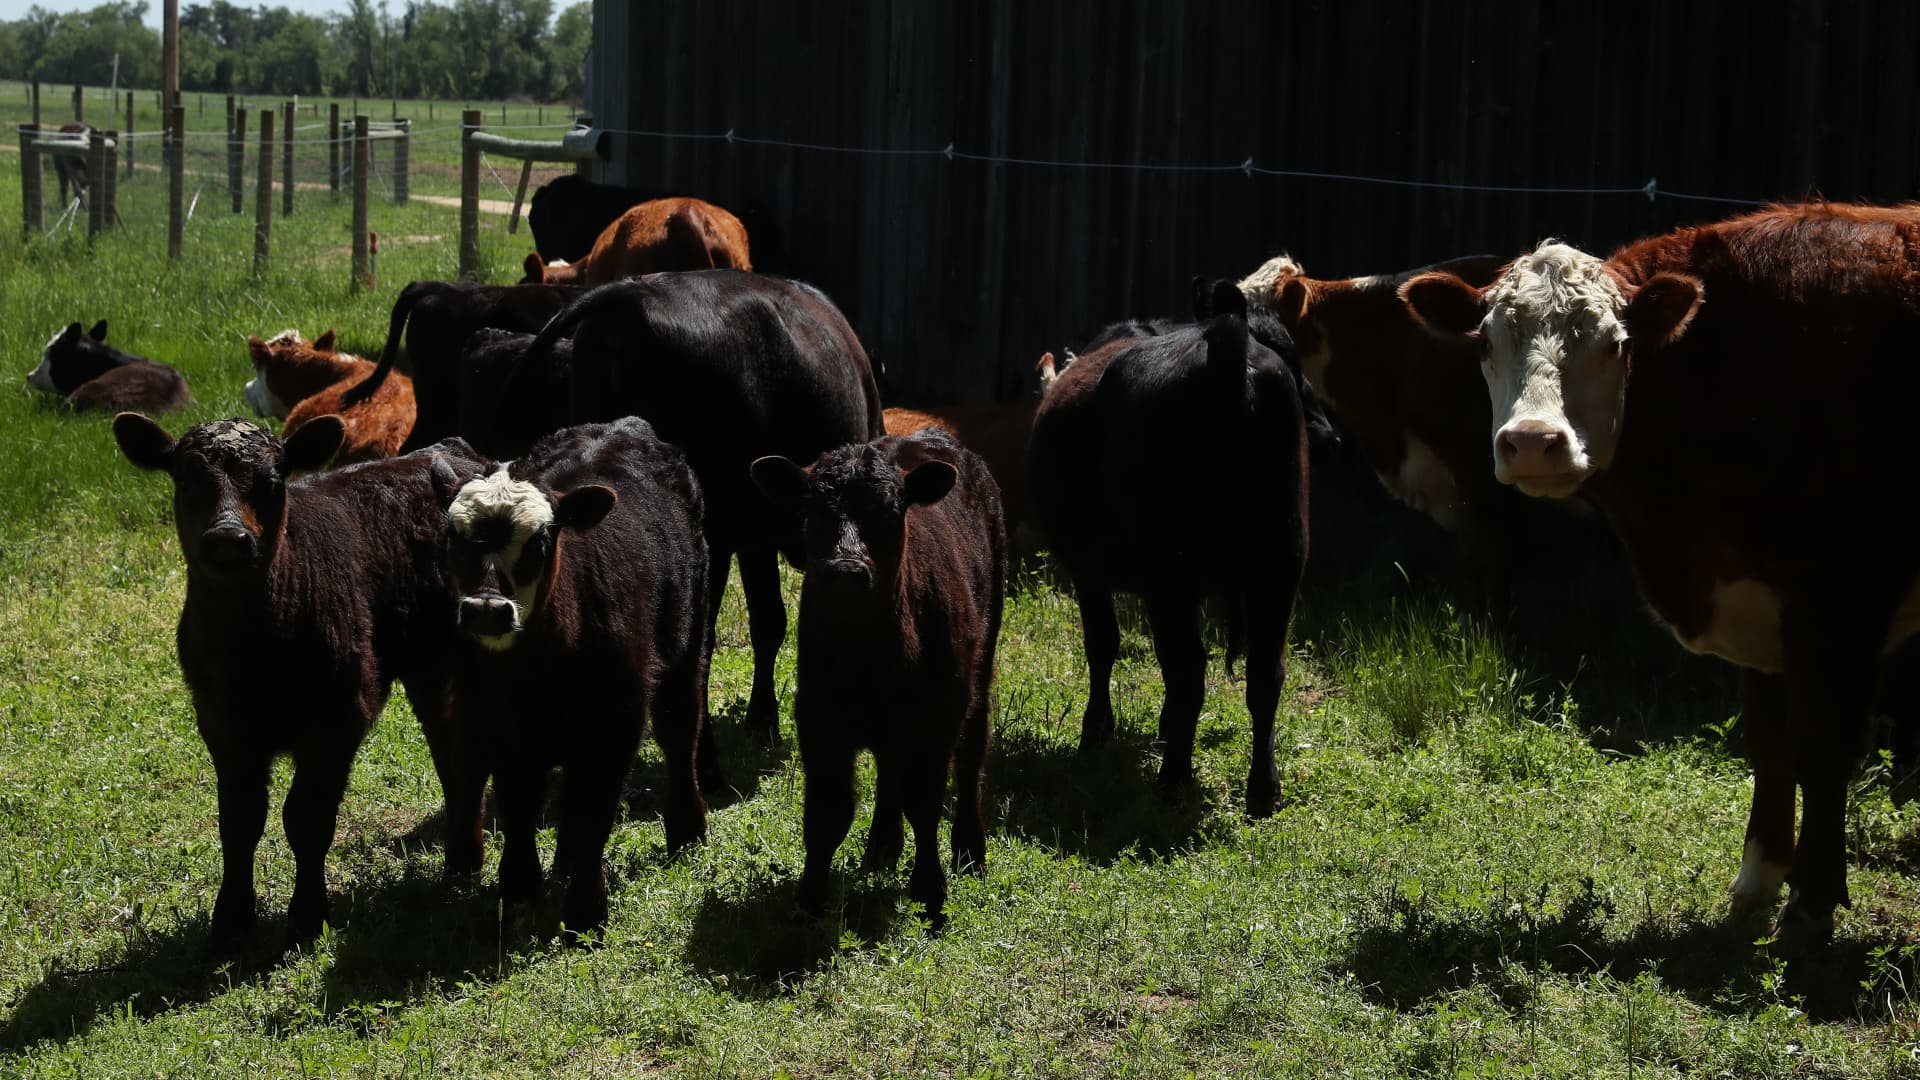 A herd of beef cattle gather in the shade of old barn on May 4, 2020 in Owings, Maryland.